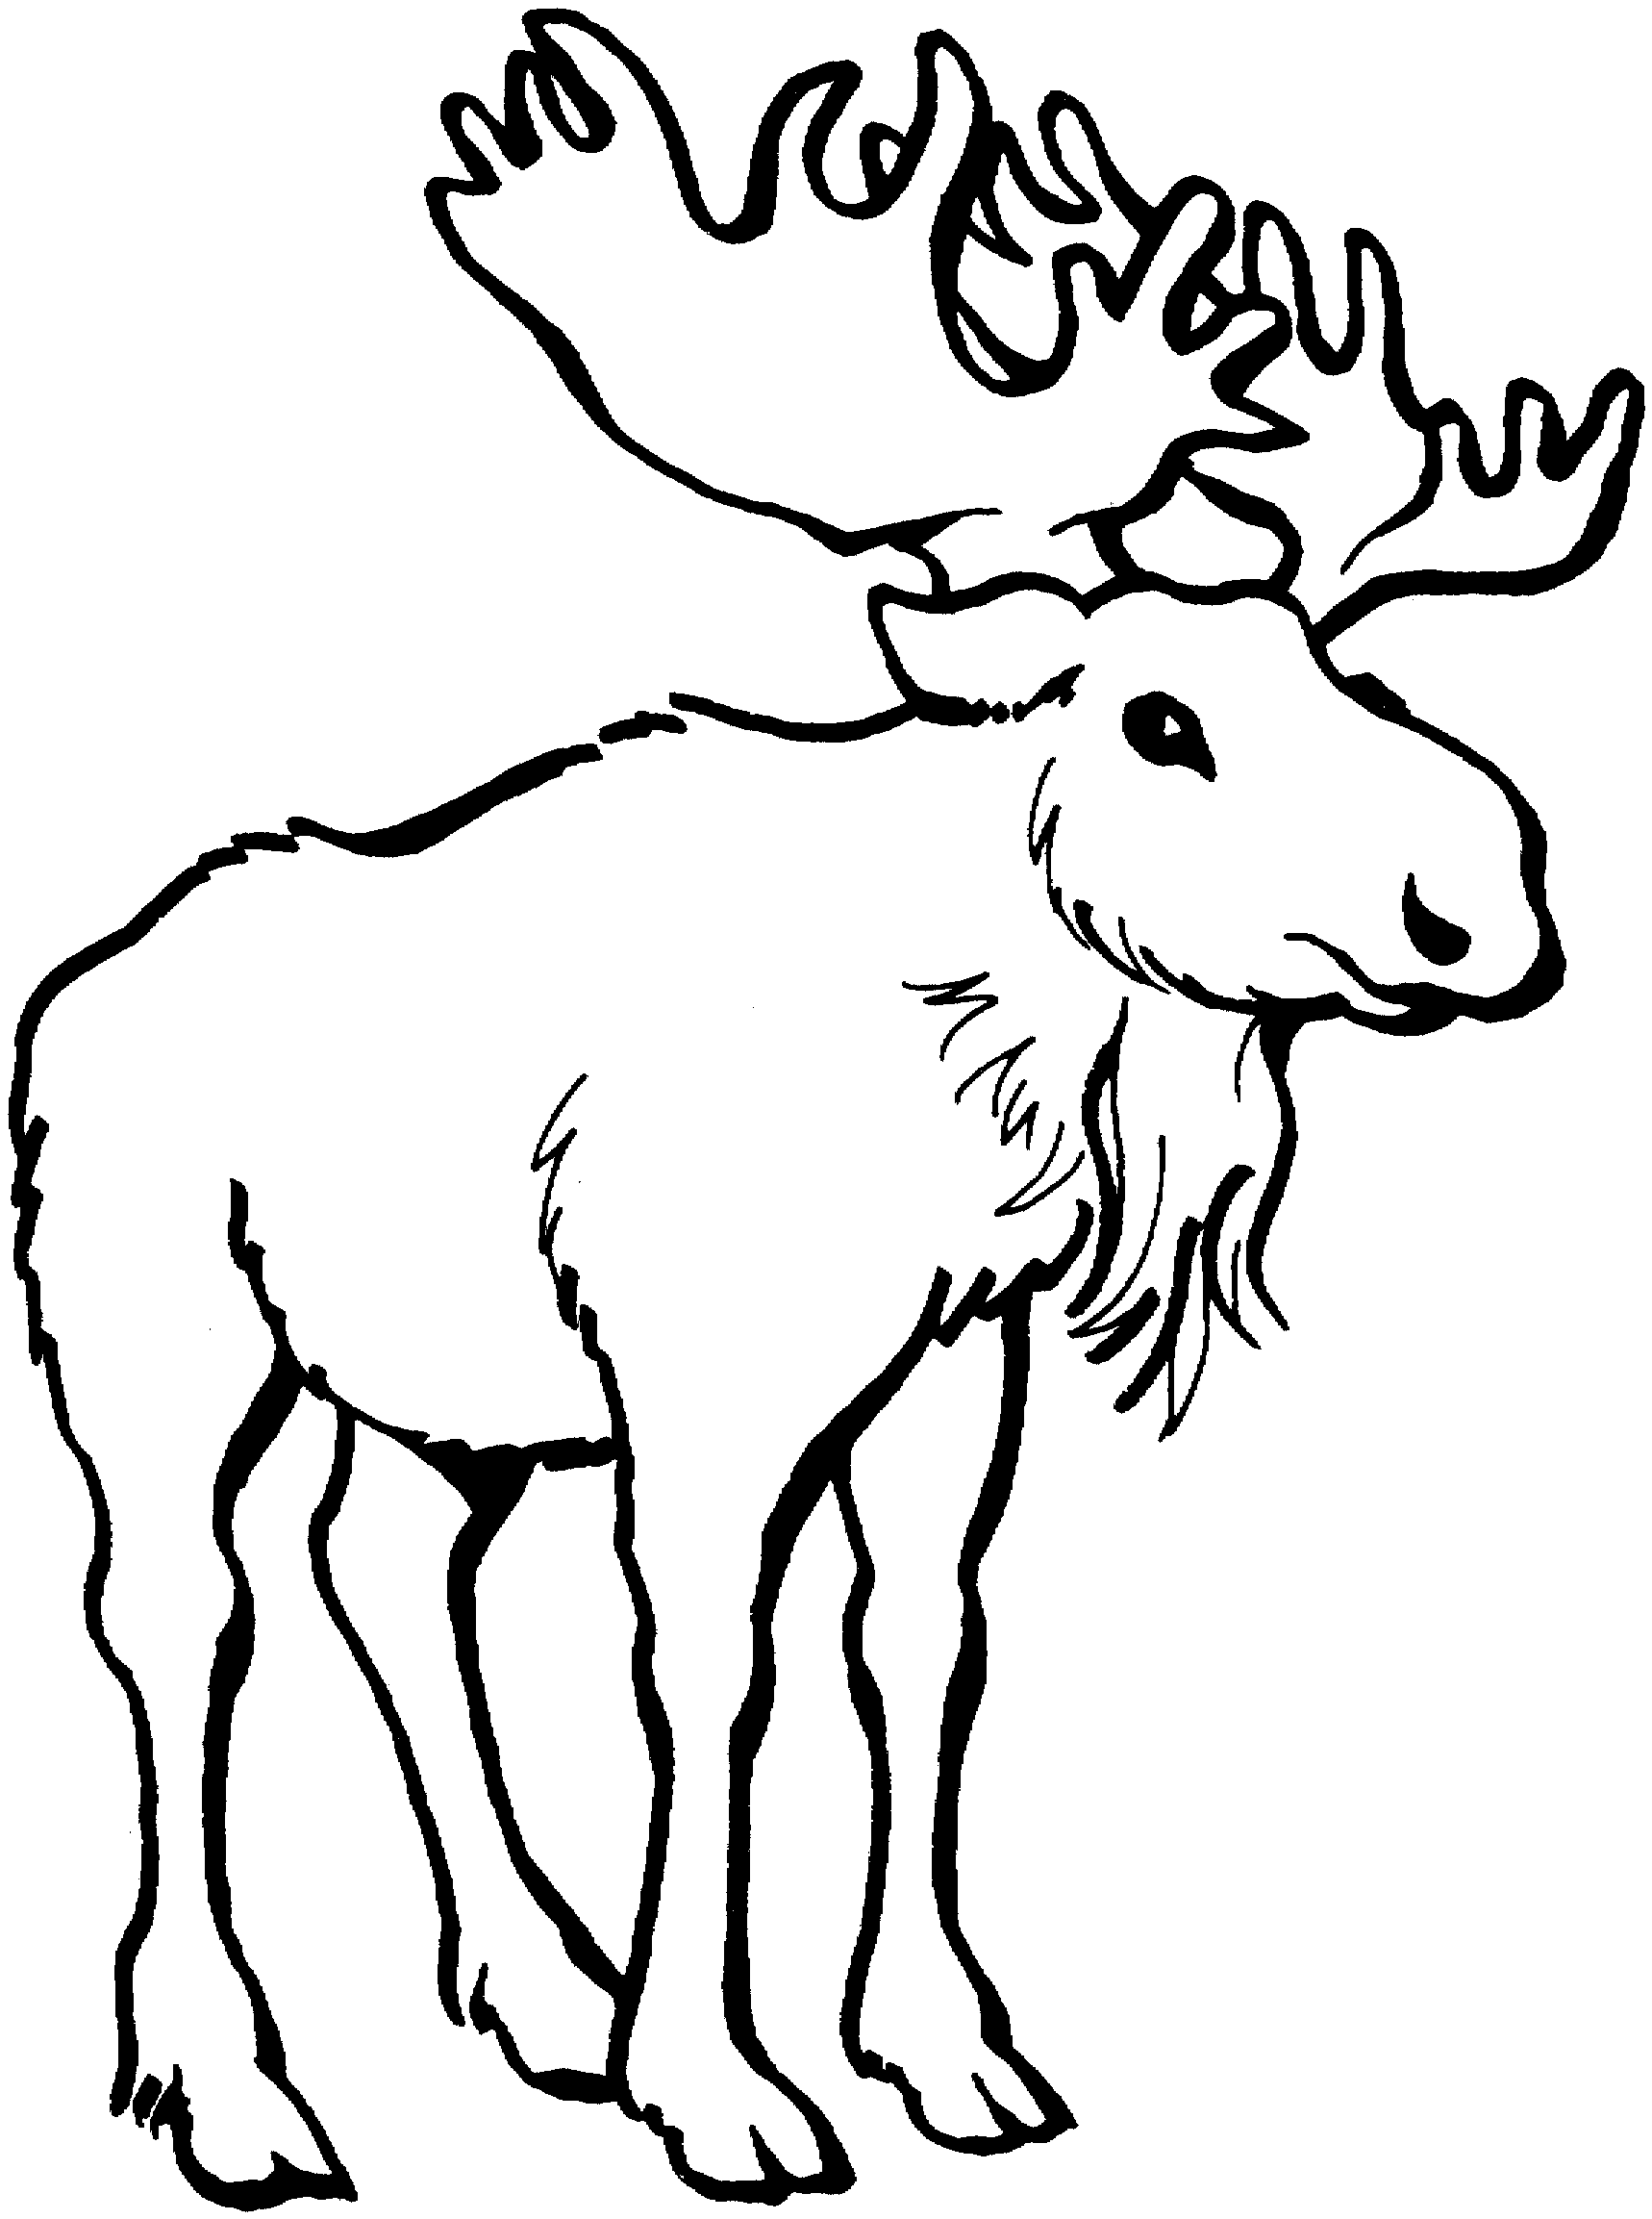 Free moose clipart the cliparts